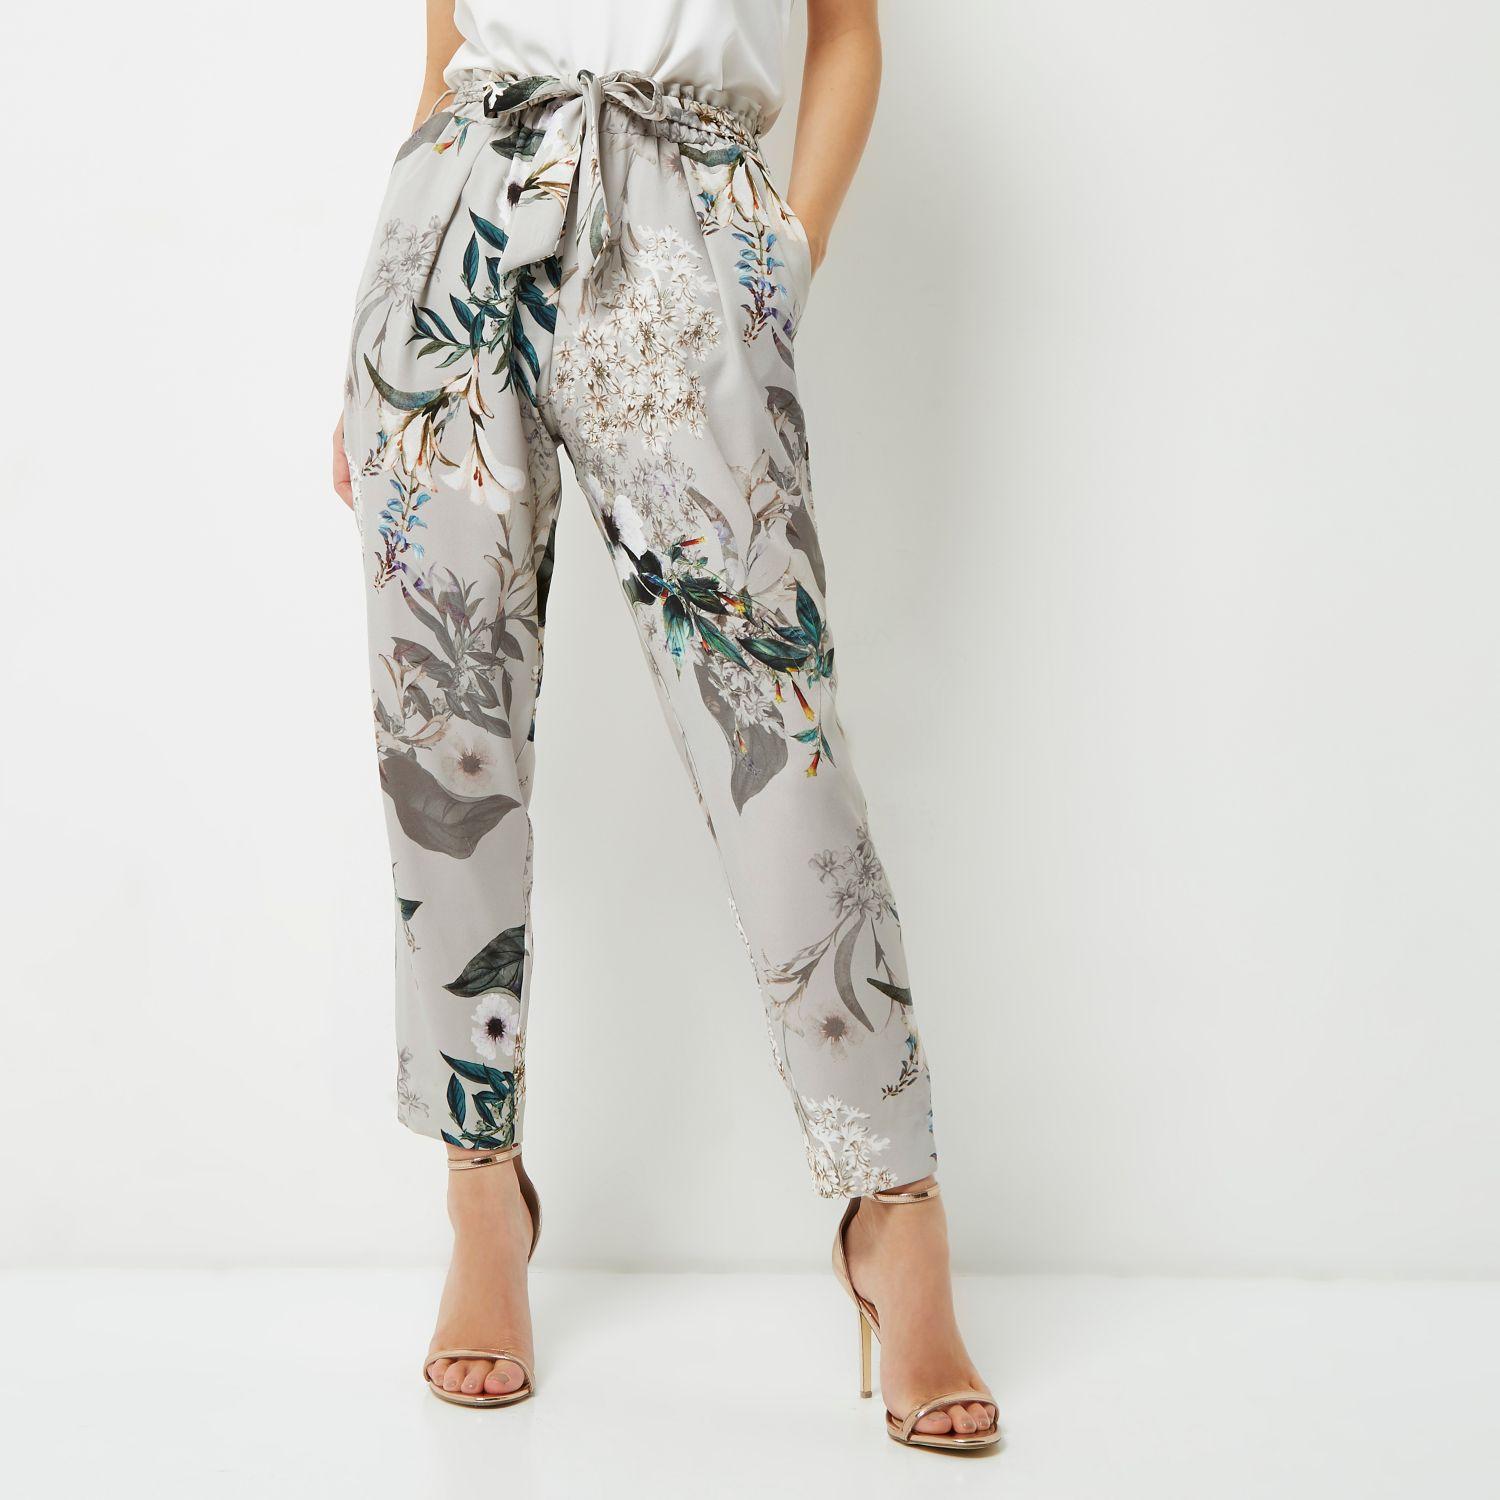 River Island Petite Grey Floral Print Tapered Trousers in Gray - Lyst